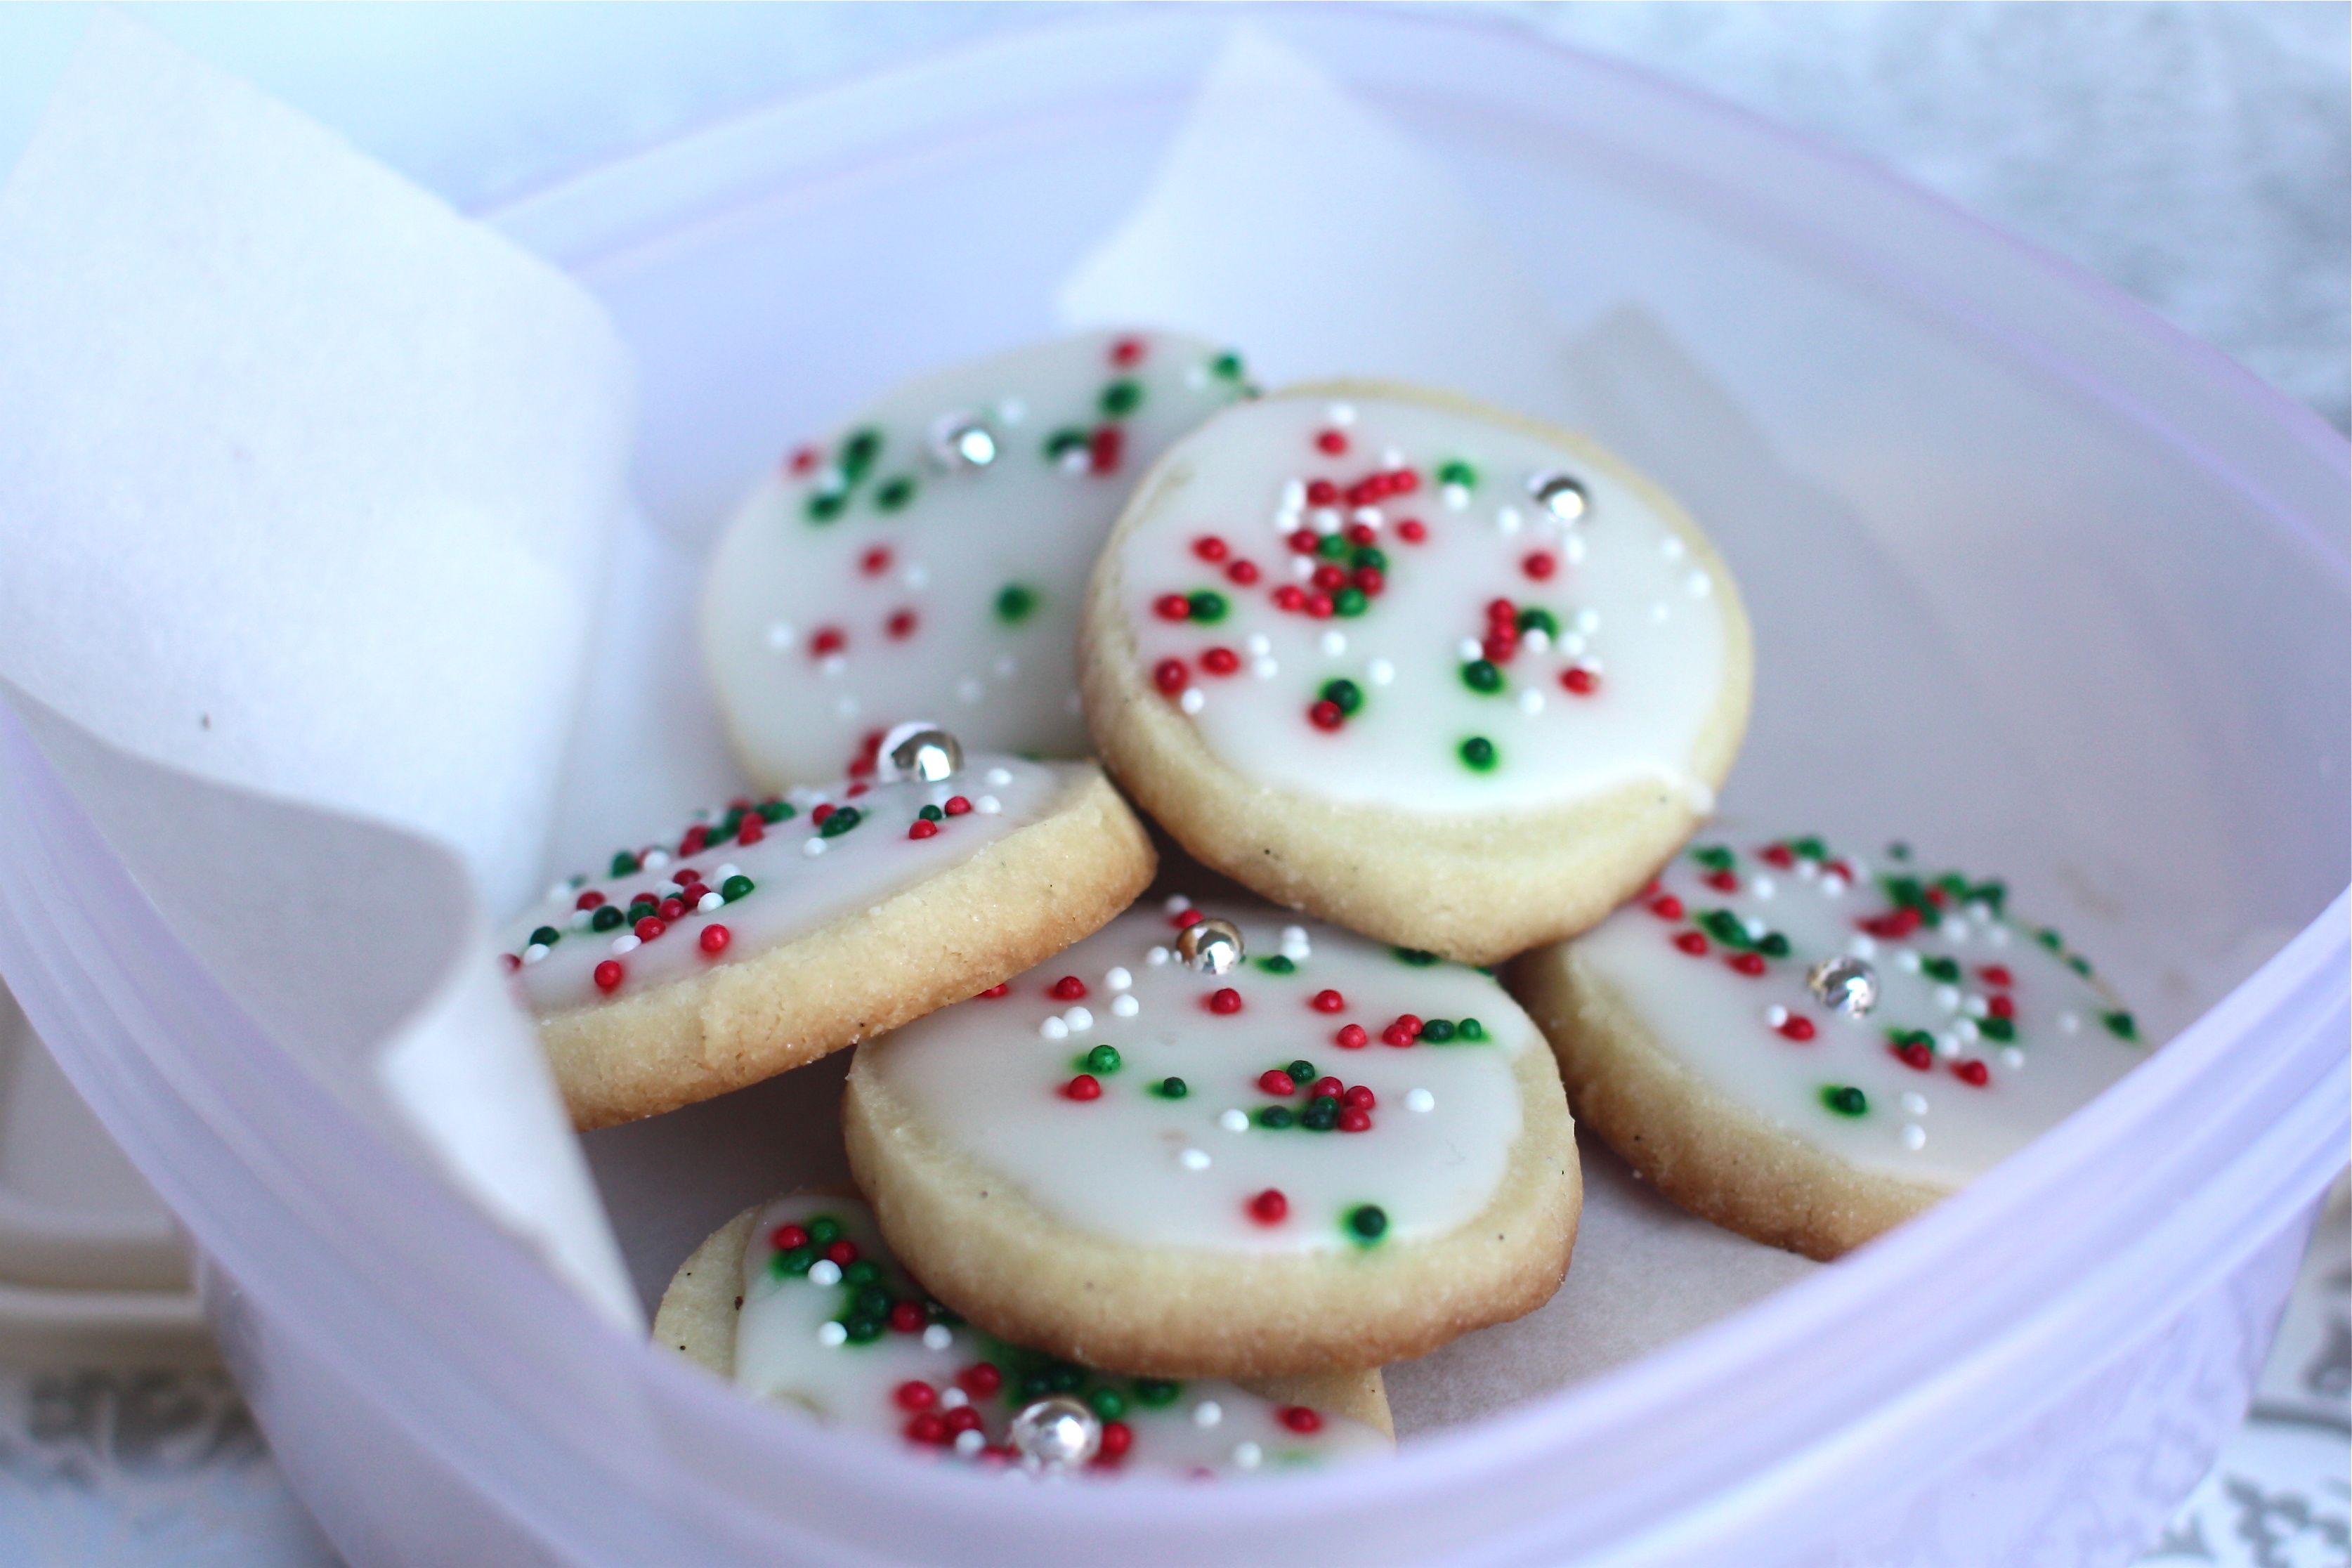 What is one of Ina Garten's recipes for sugar cookies?